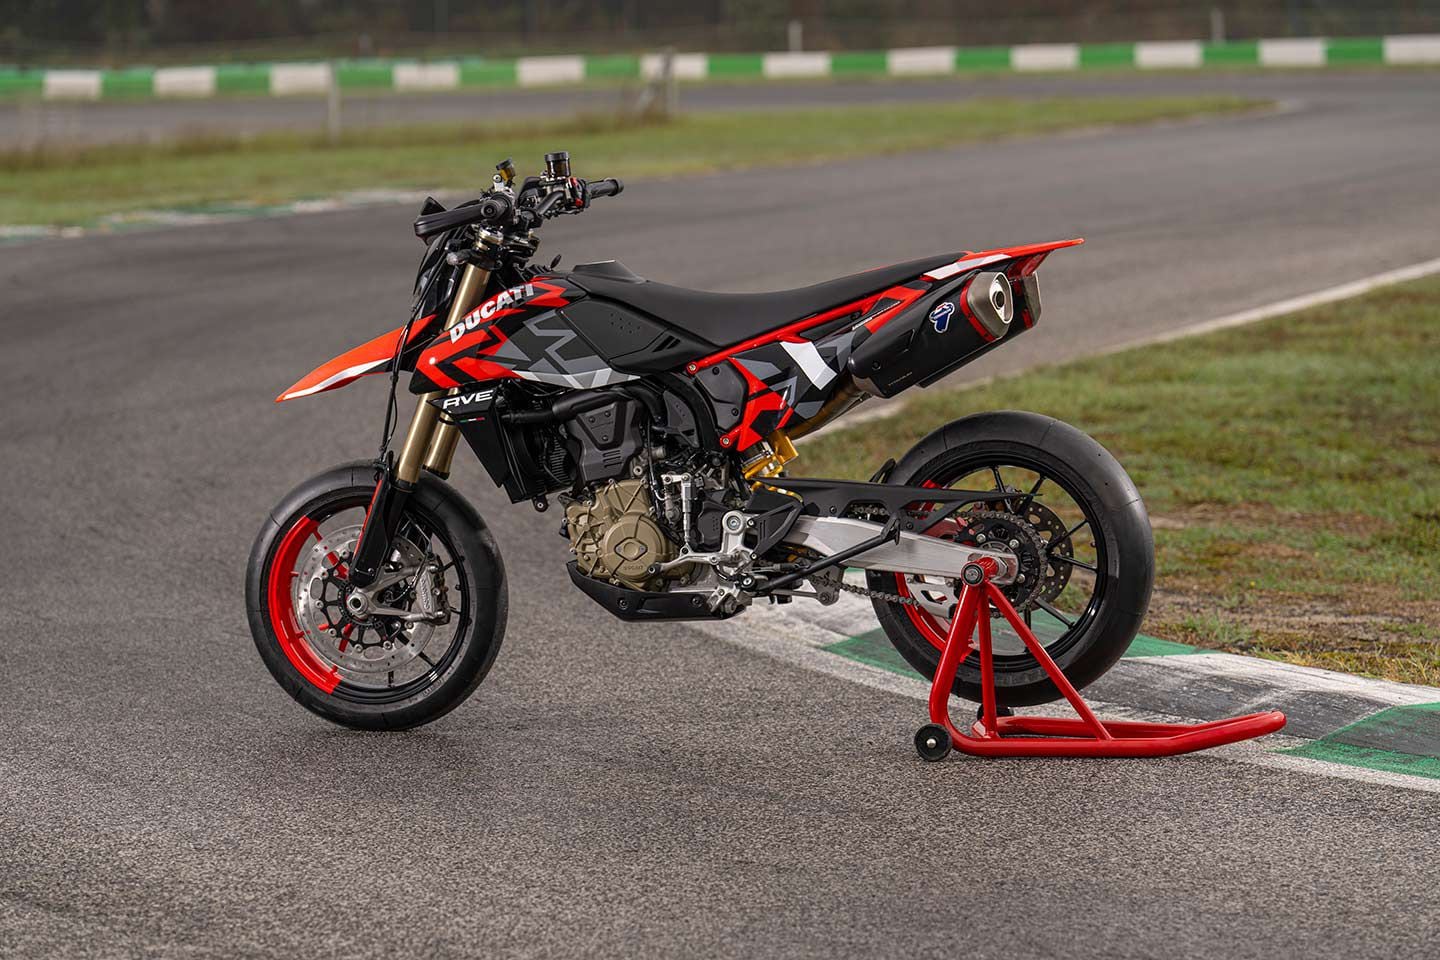 The addition of a Termignoni exhaust boosts the power of the Hypermotard 698 Mono to a claimed 84.5 hp.